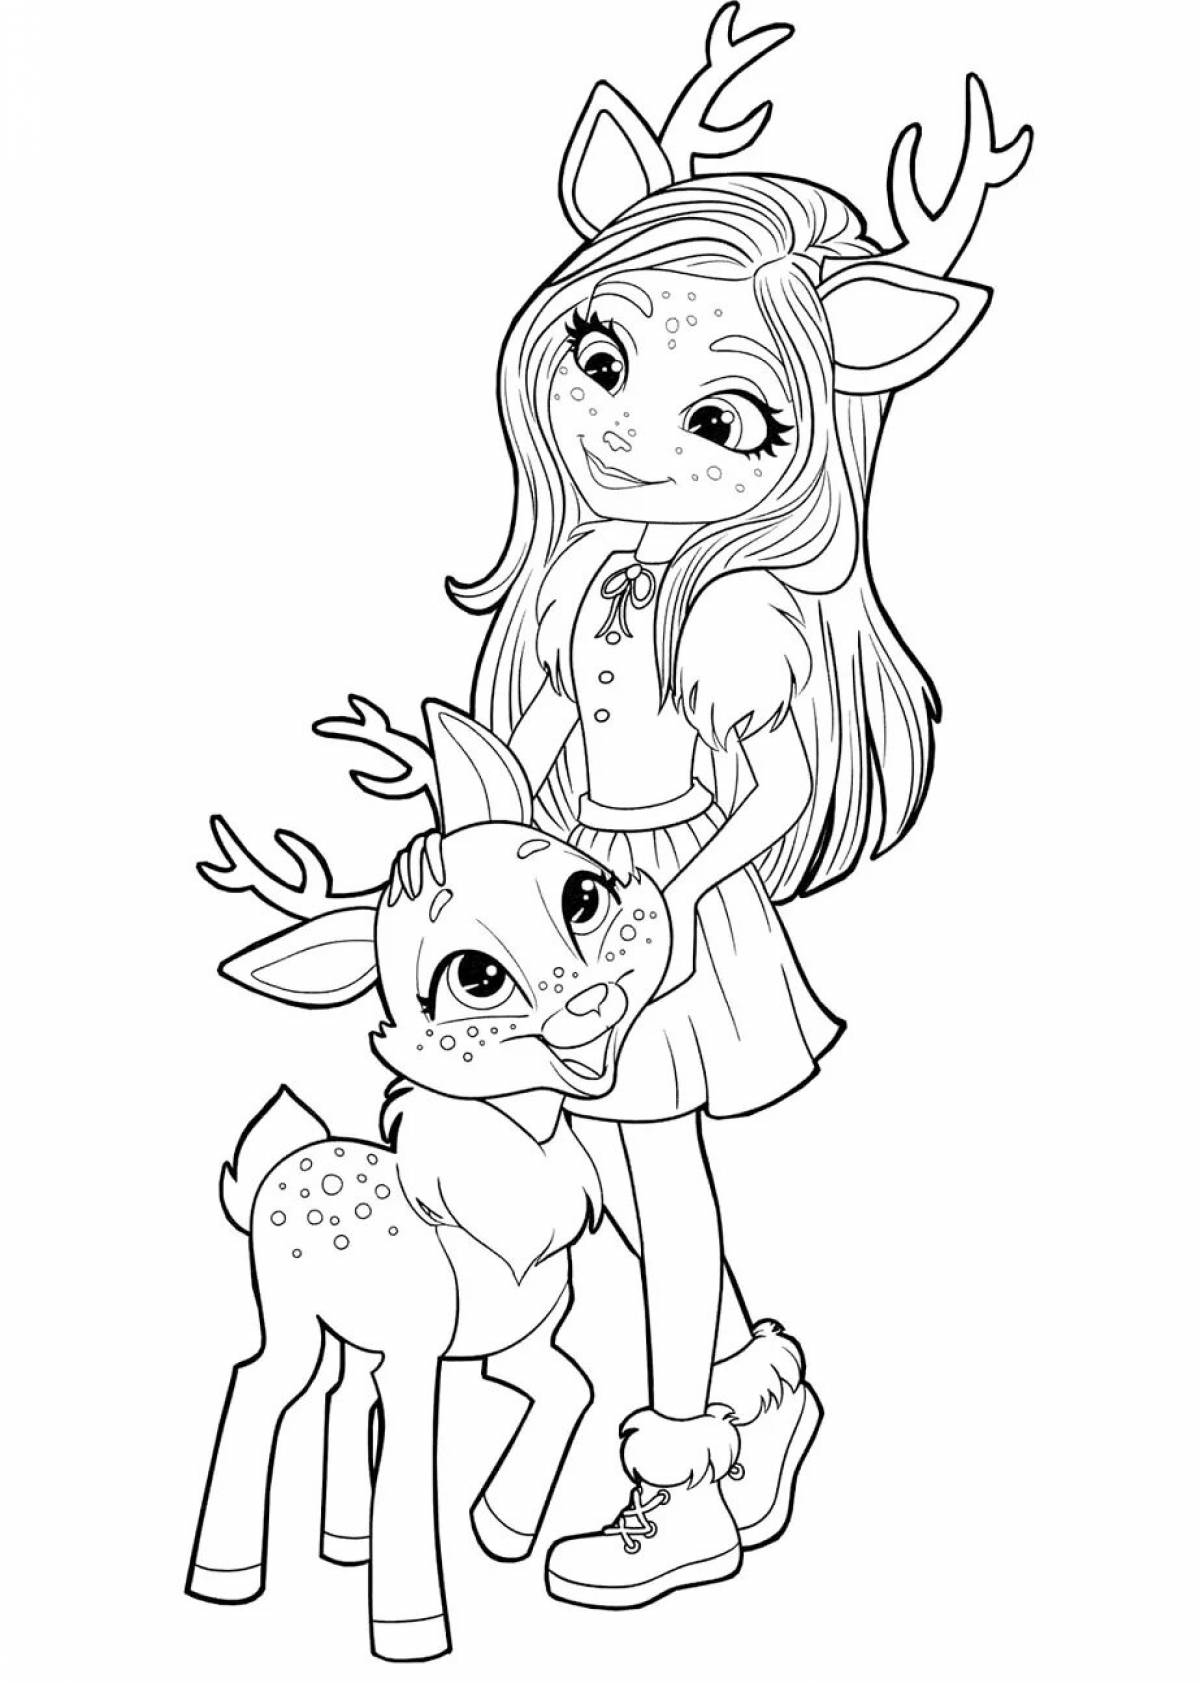 Blessed rabbit coloring page